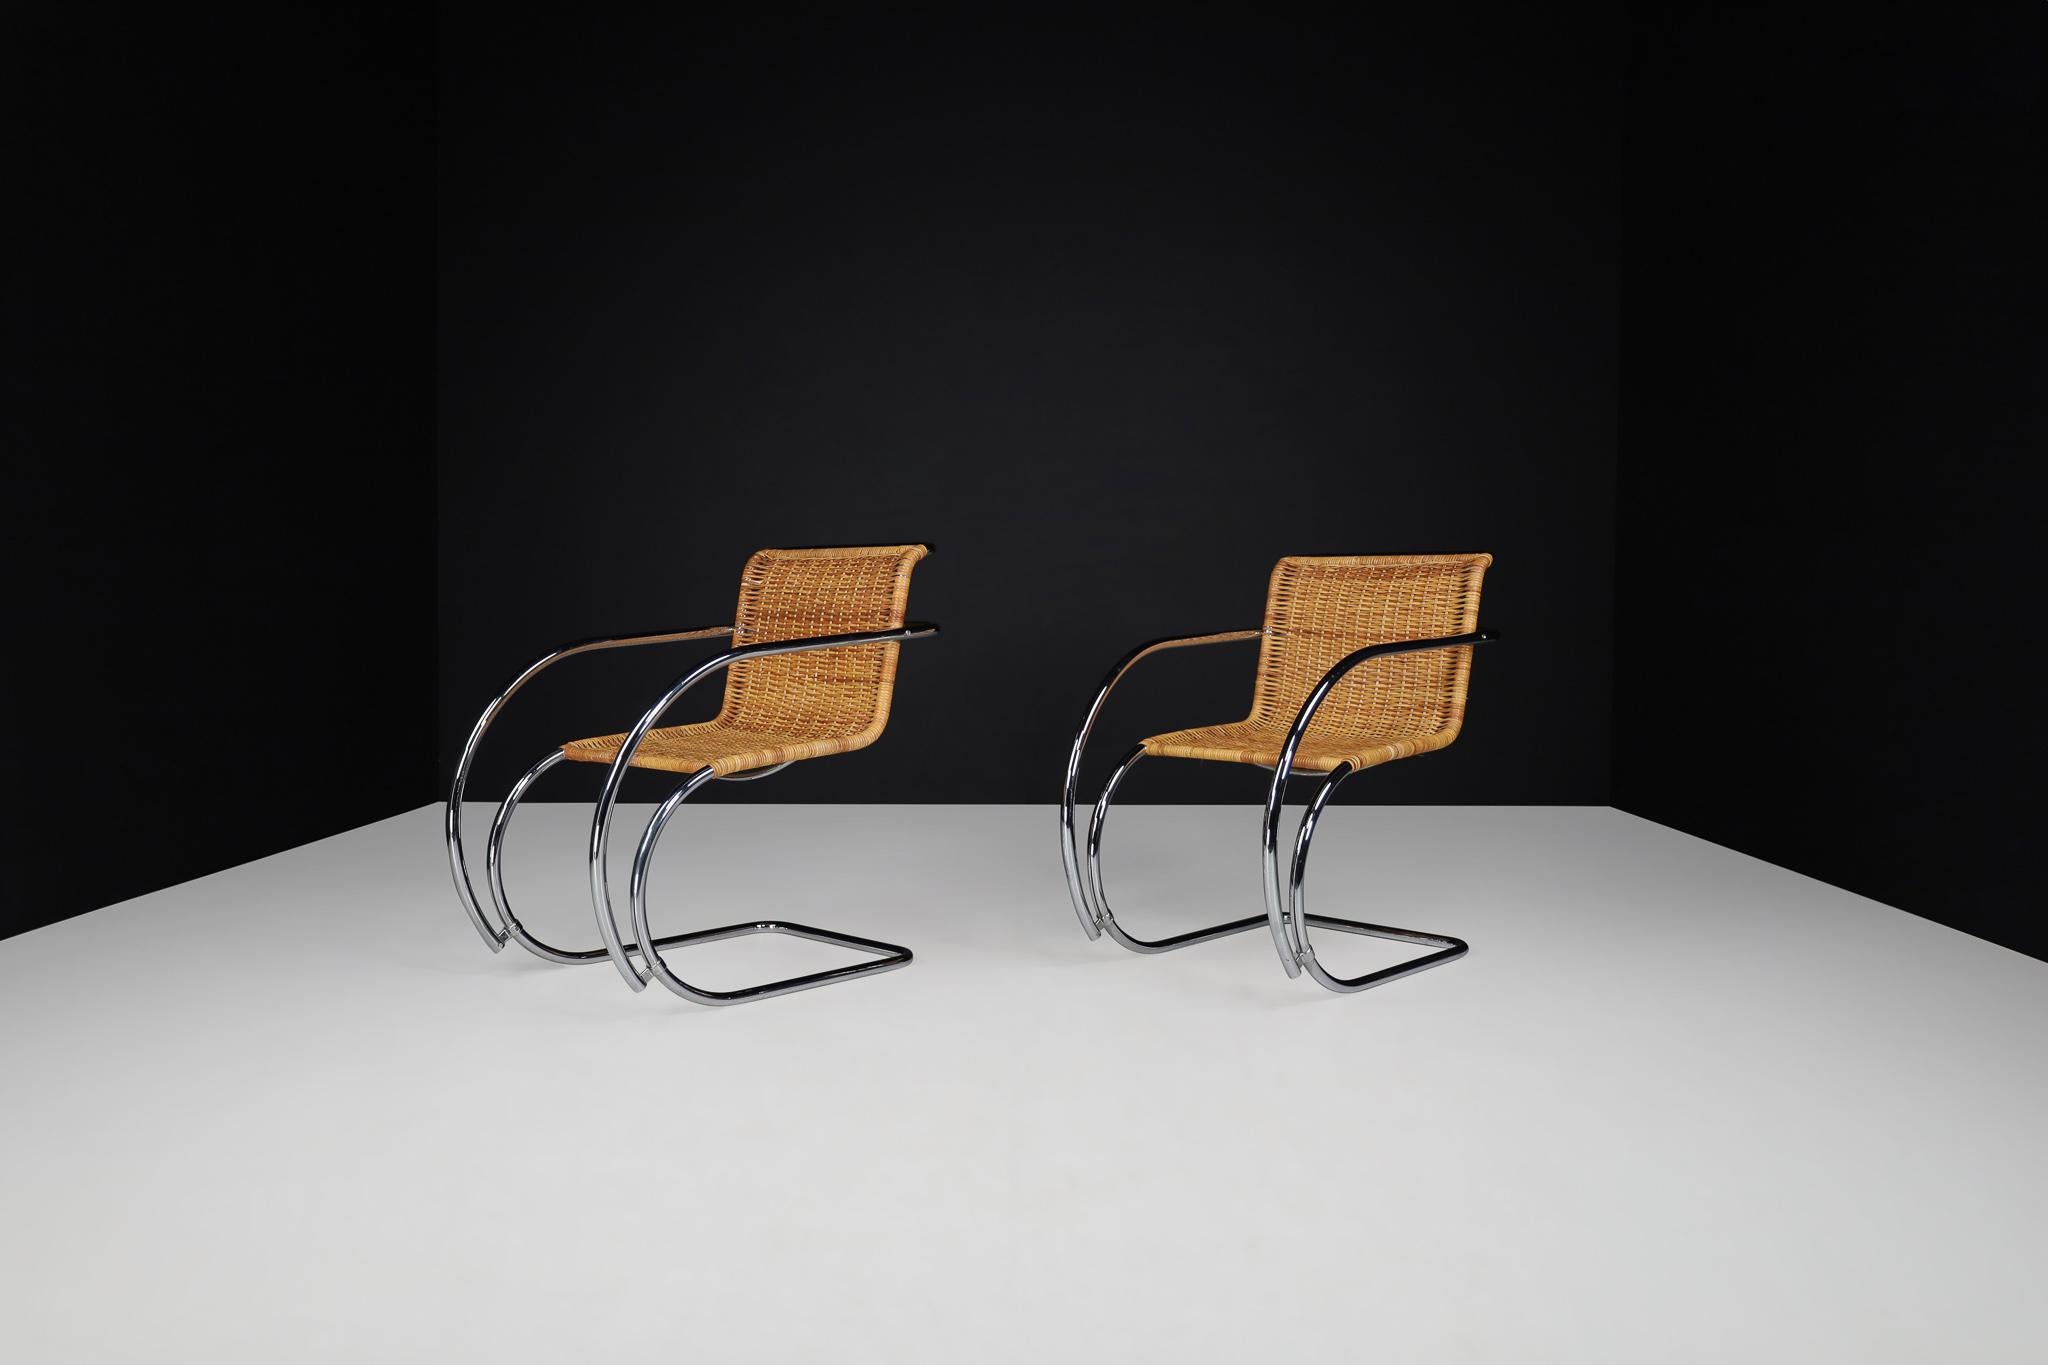  Mies Van Der Rohe MR20 Chrome & Wicker Lounge Chairs, 1970s  In Good Condition For Sale In Almelo, NL